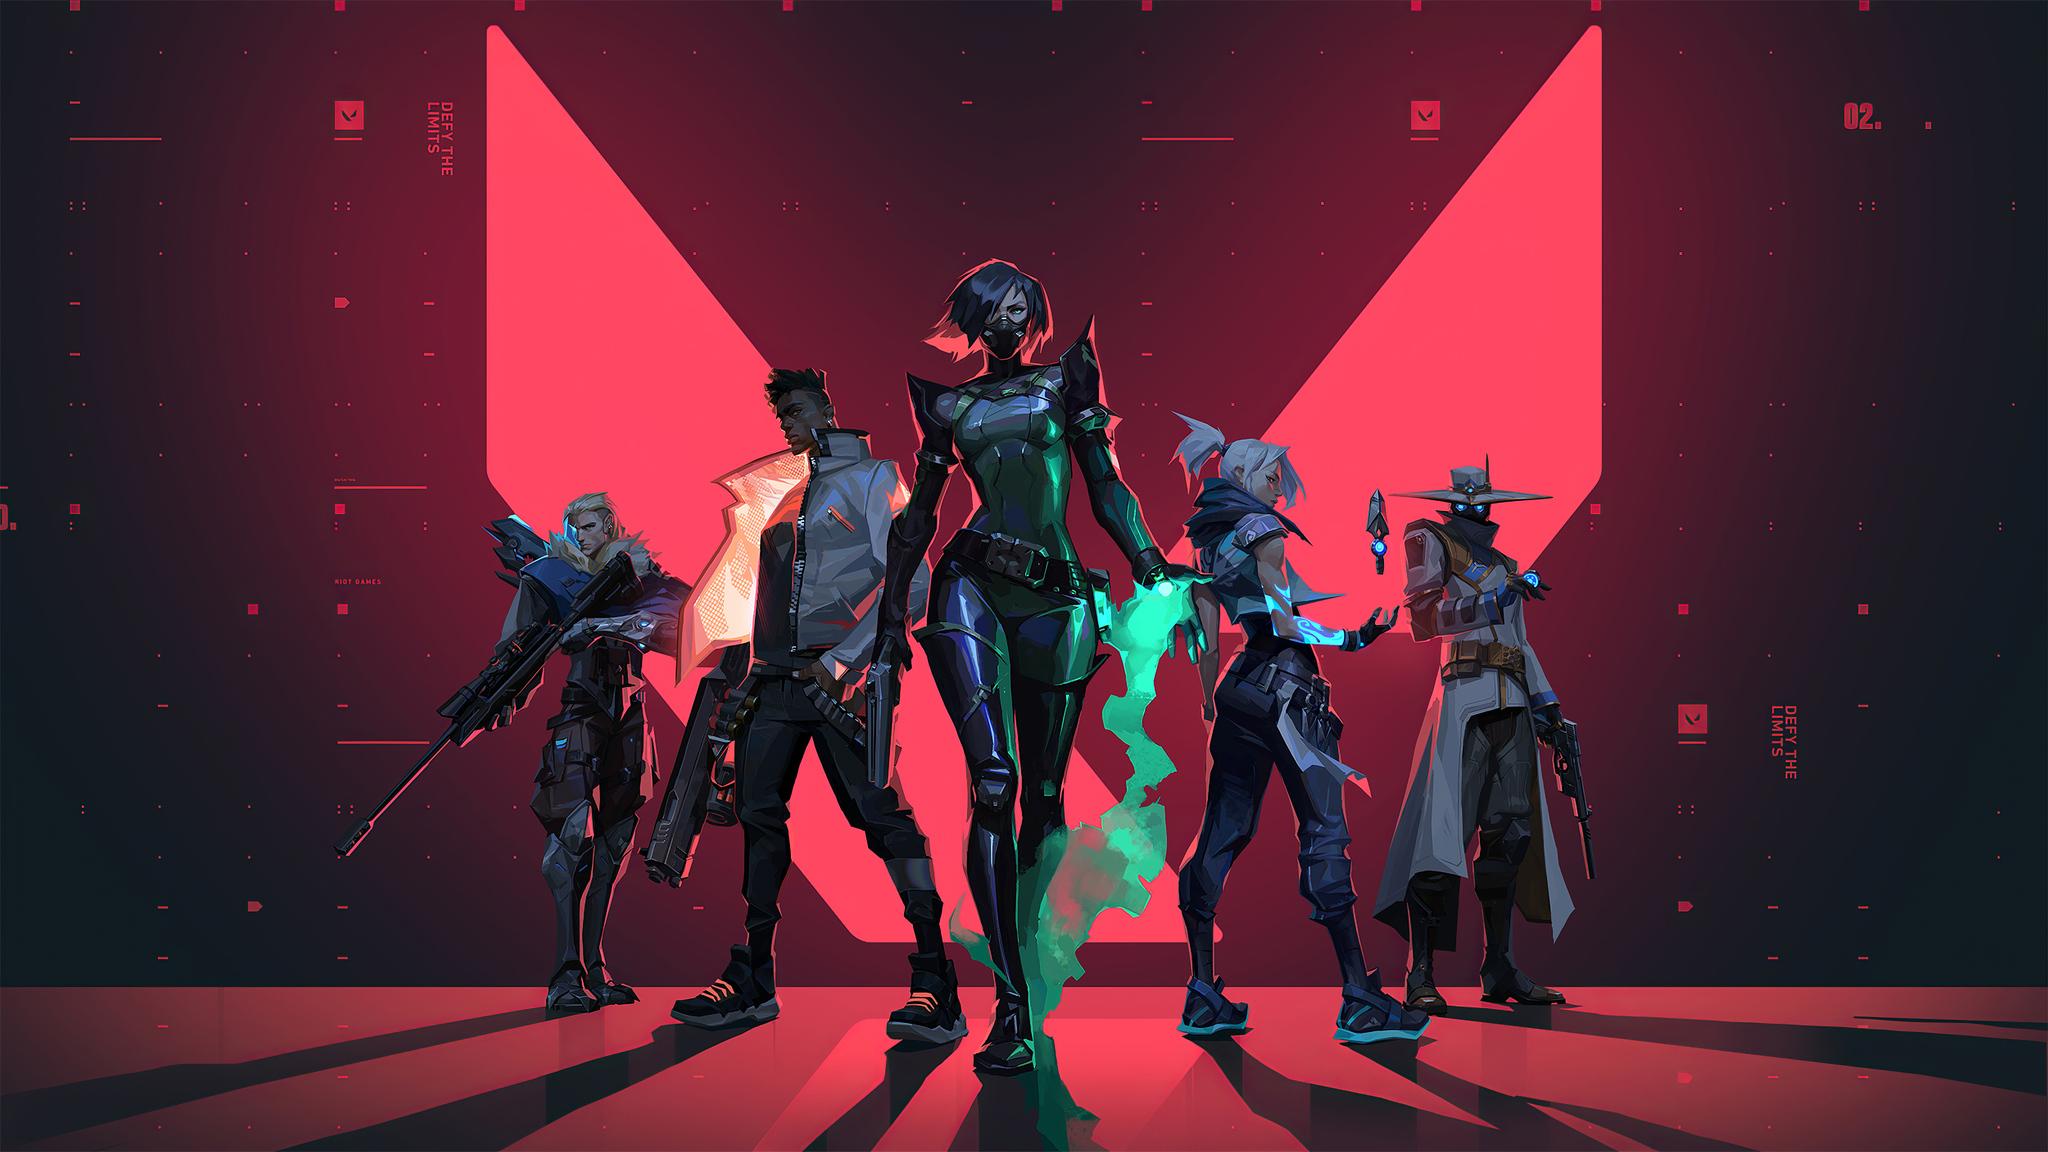 Valorant agent line-up with Sova, Phoenix, Viper, Jett, and Cypher